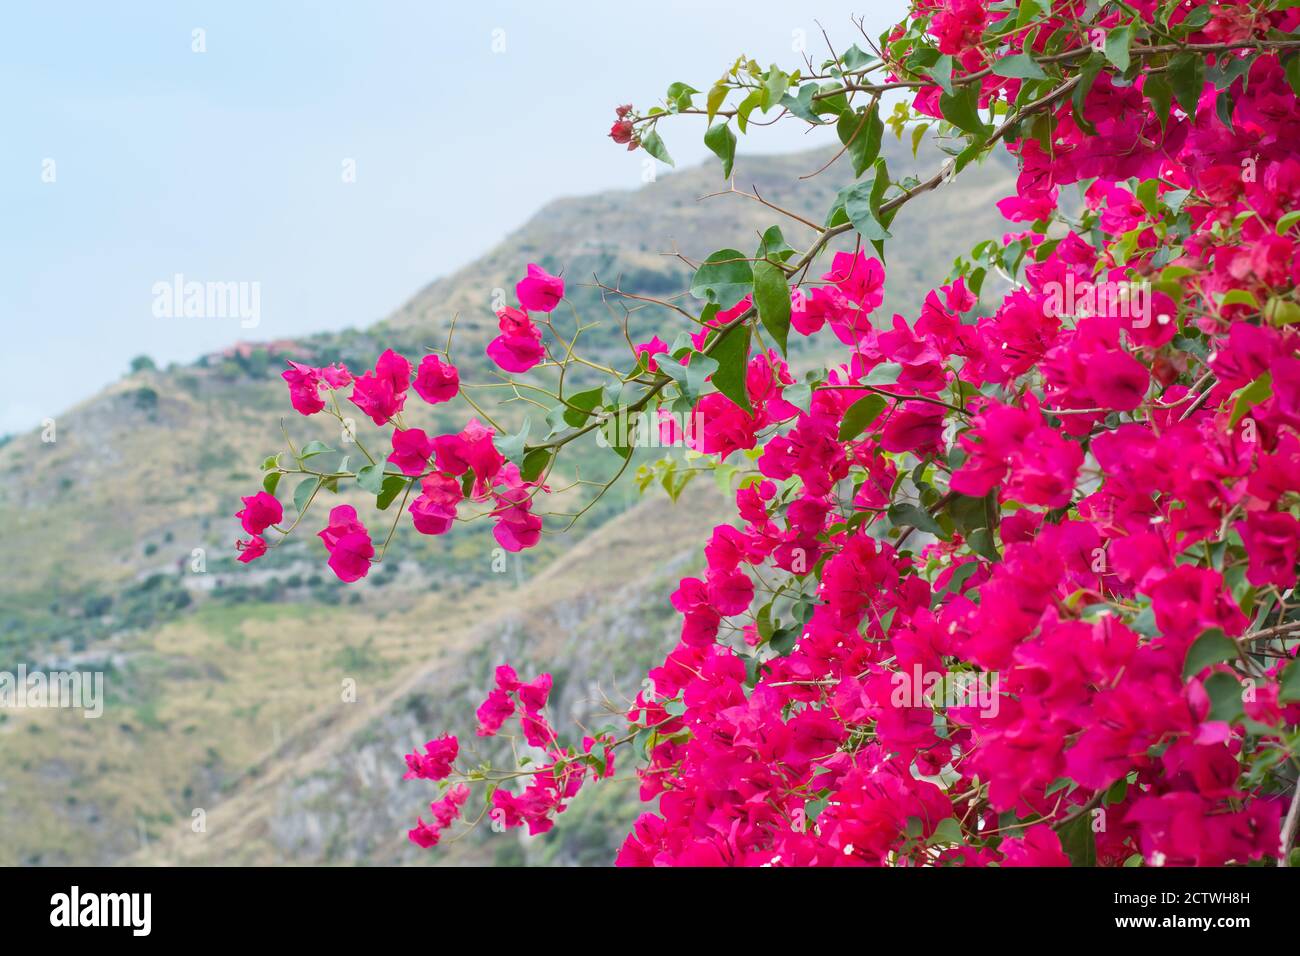 Bougainvelia branch with pink flowers in horizontal format Stock Photo